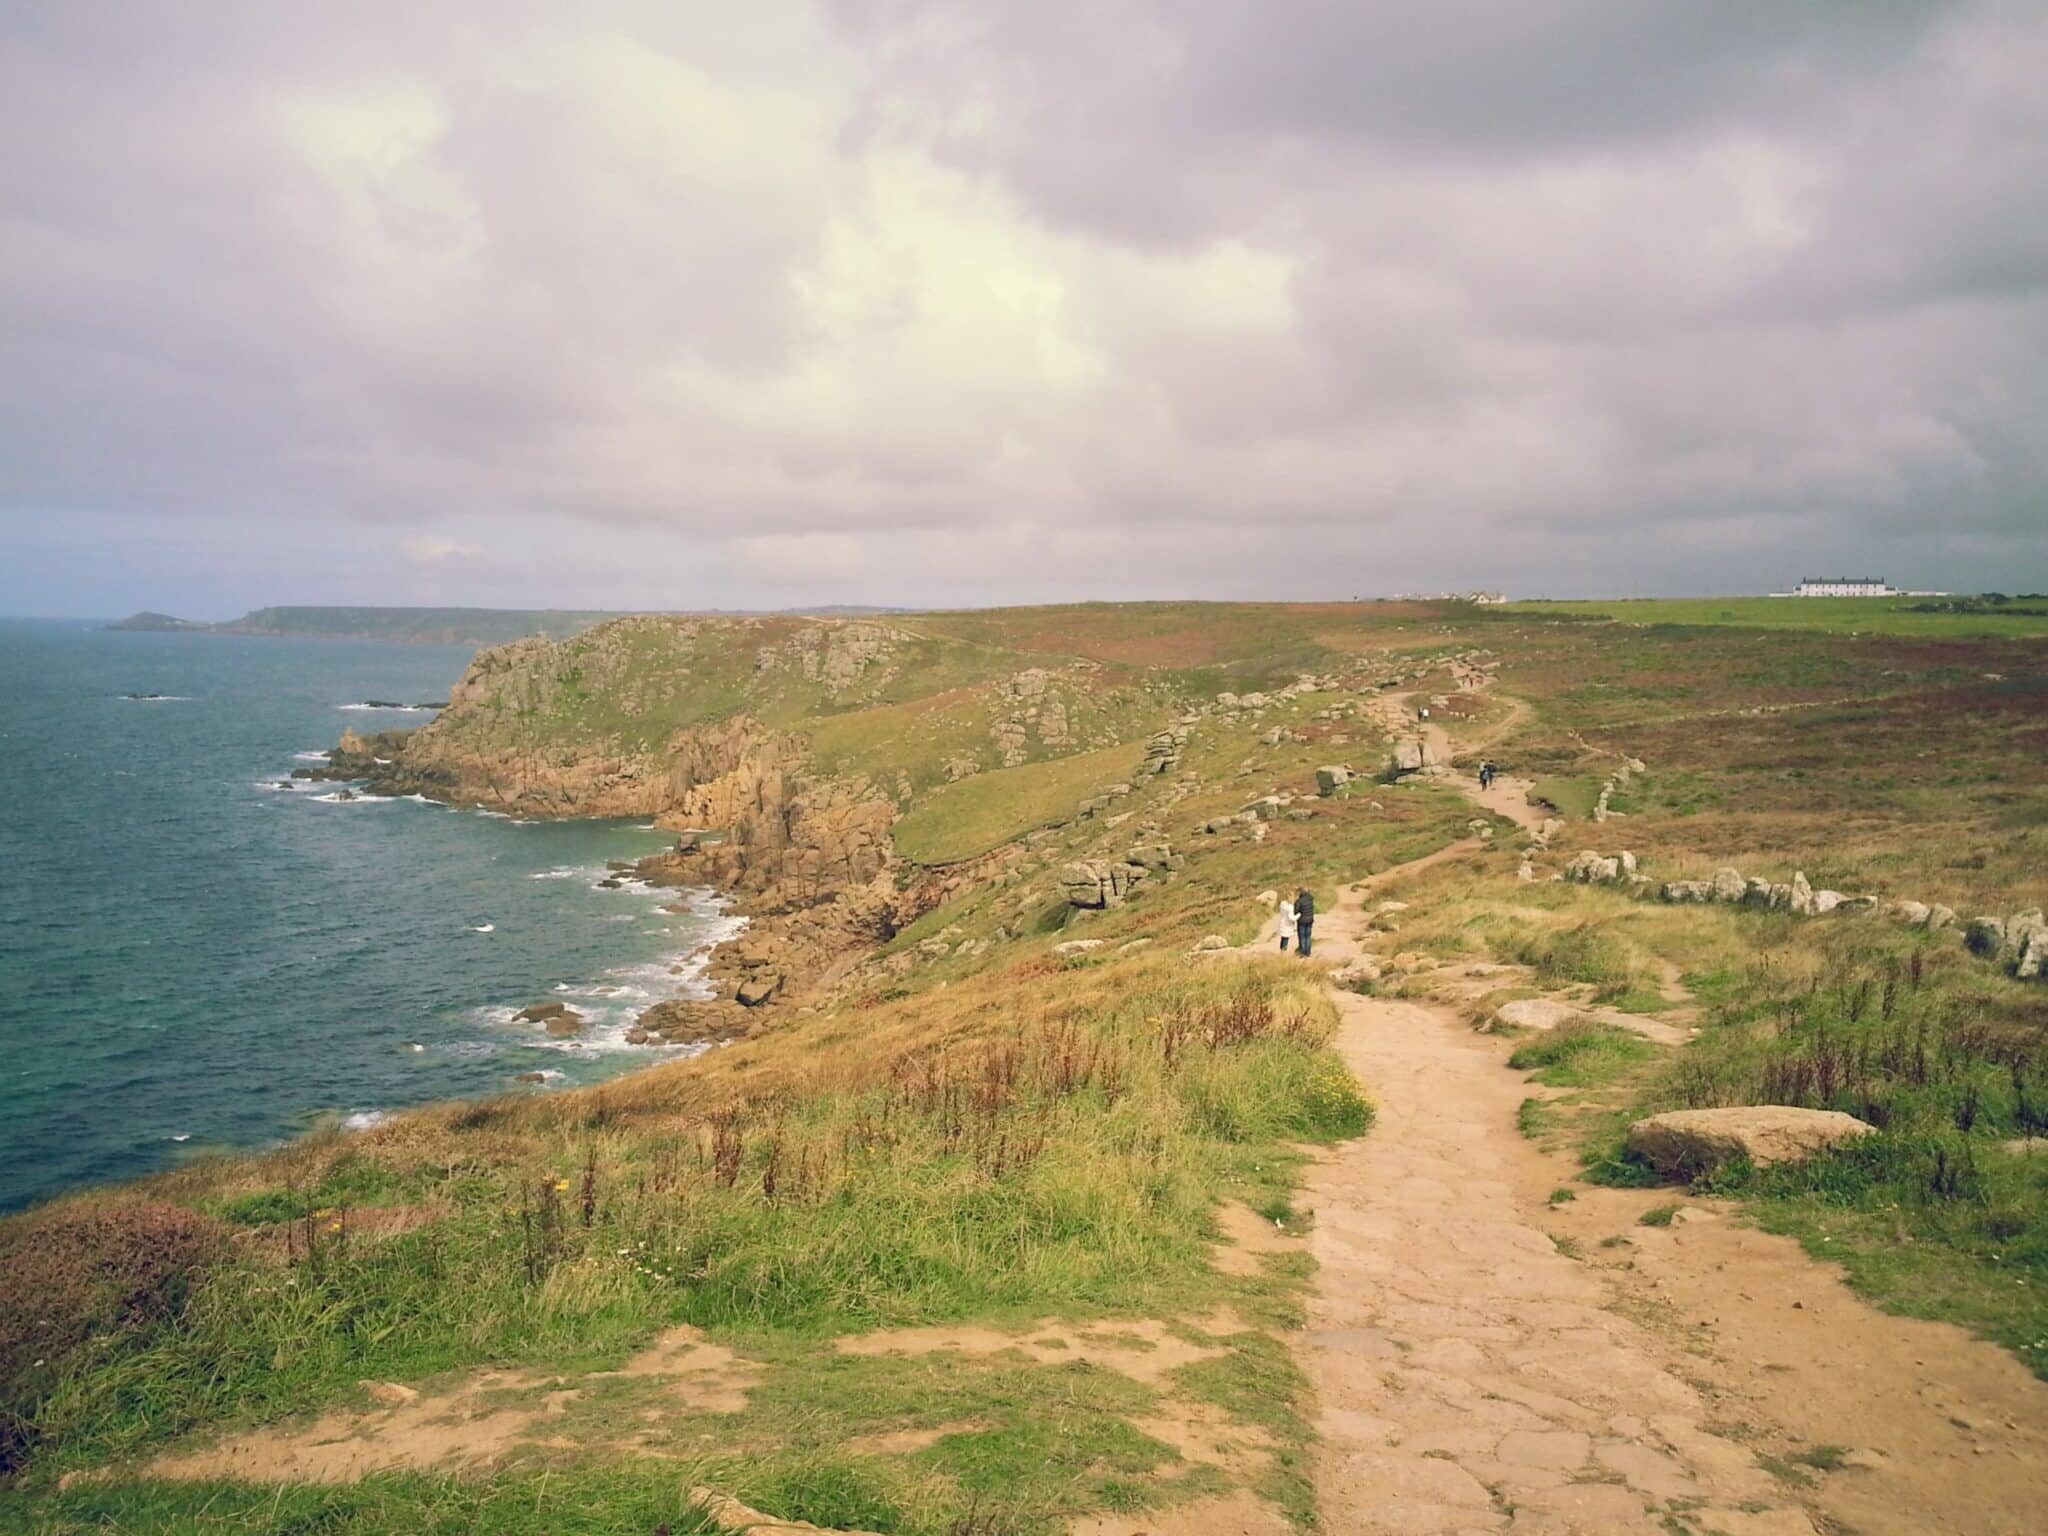 Day trip: Steep coasts at the end of England